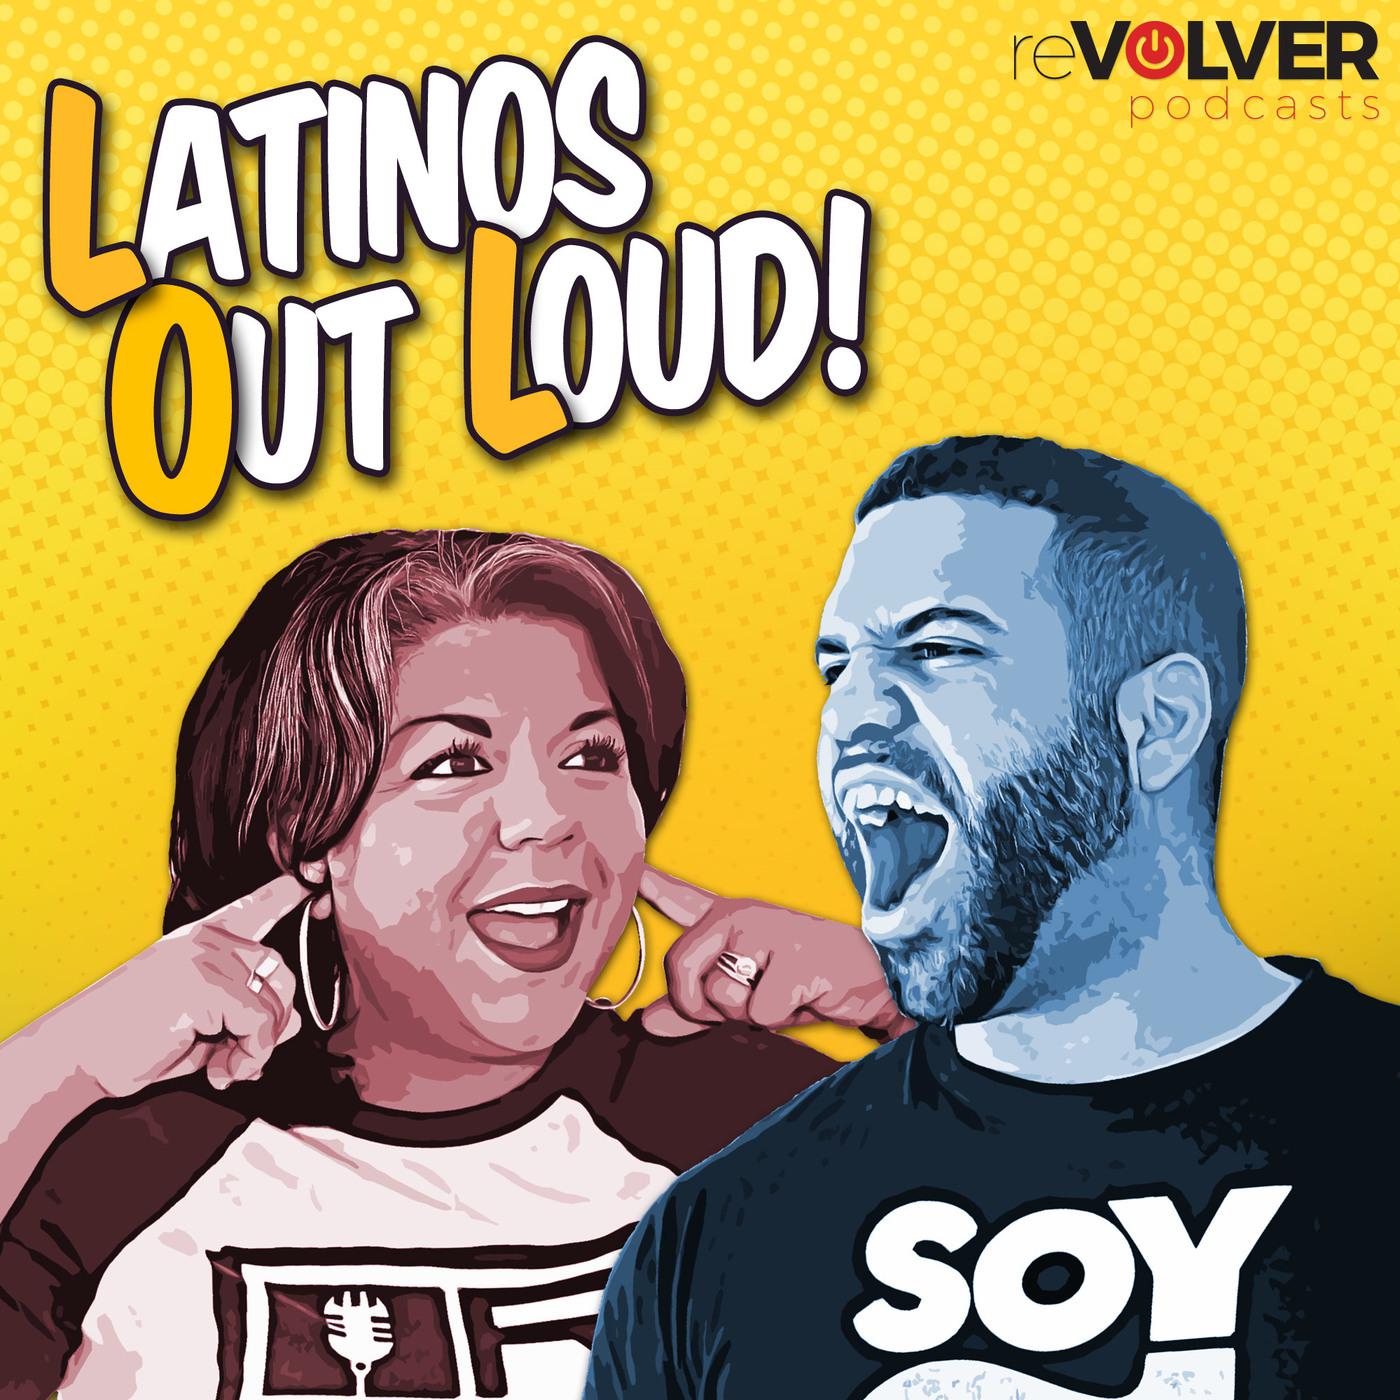 Latinos Out Loud